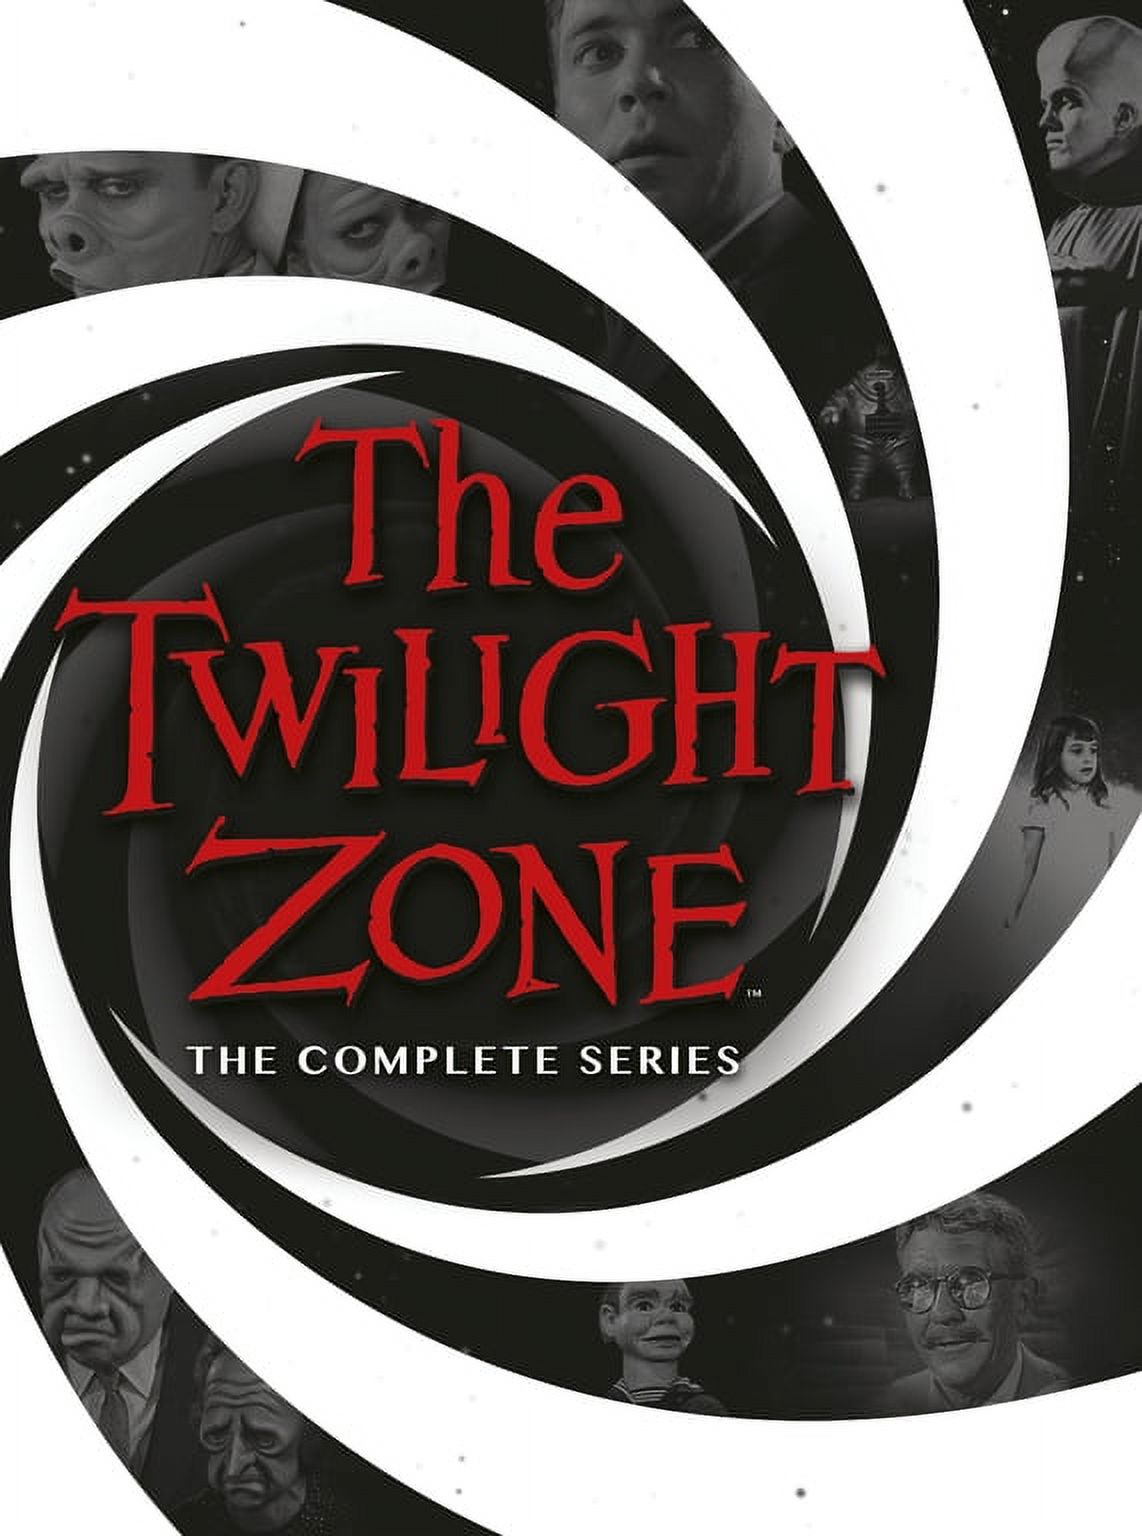 The Twilight Zone: The Complete Series (DVD) - image 1 of 3